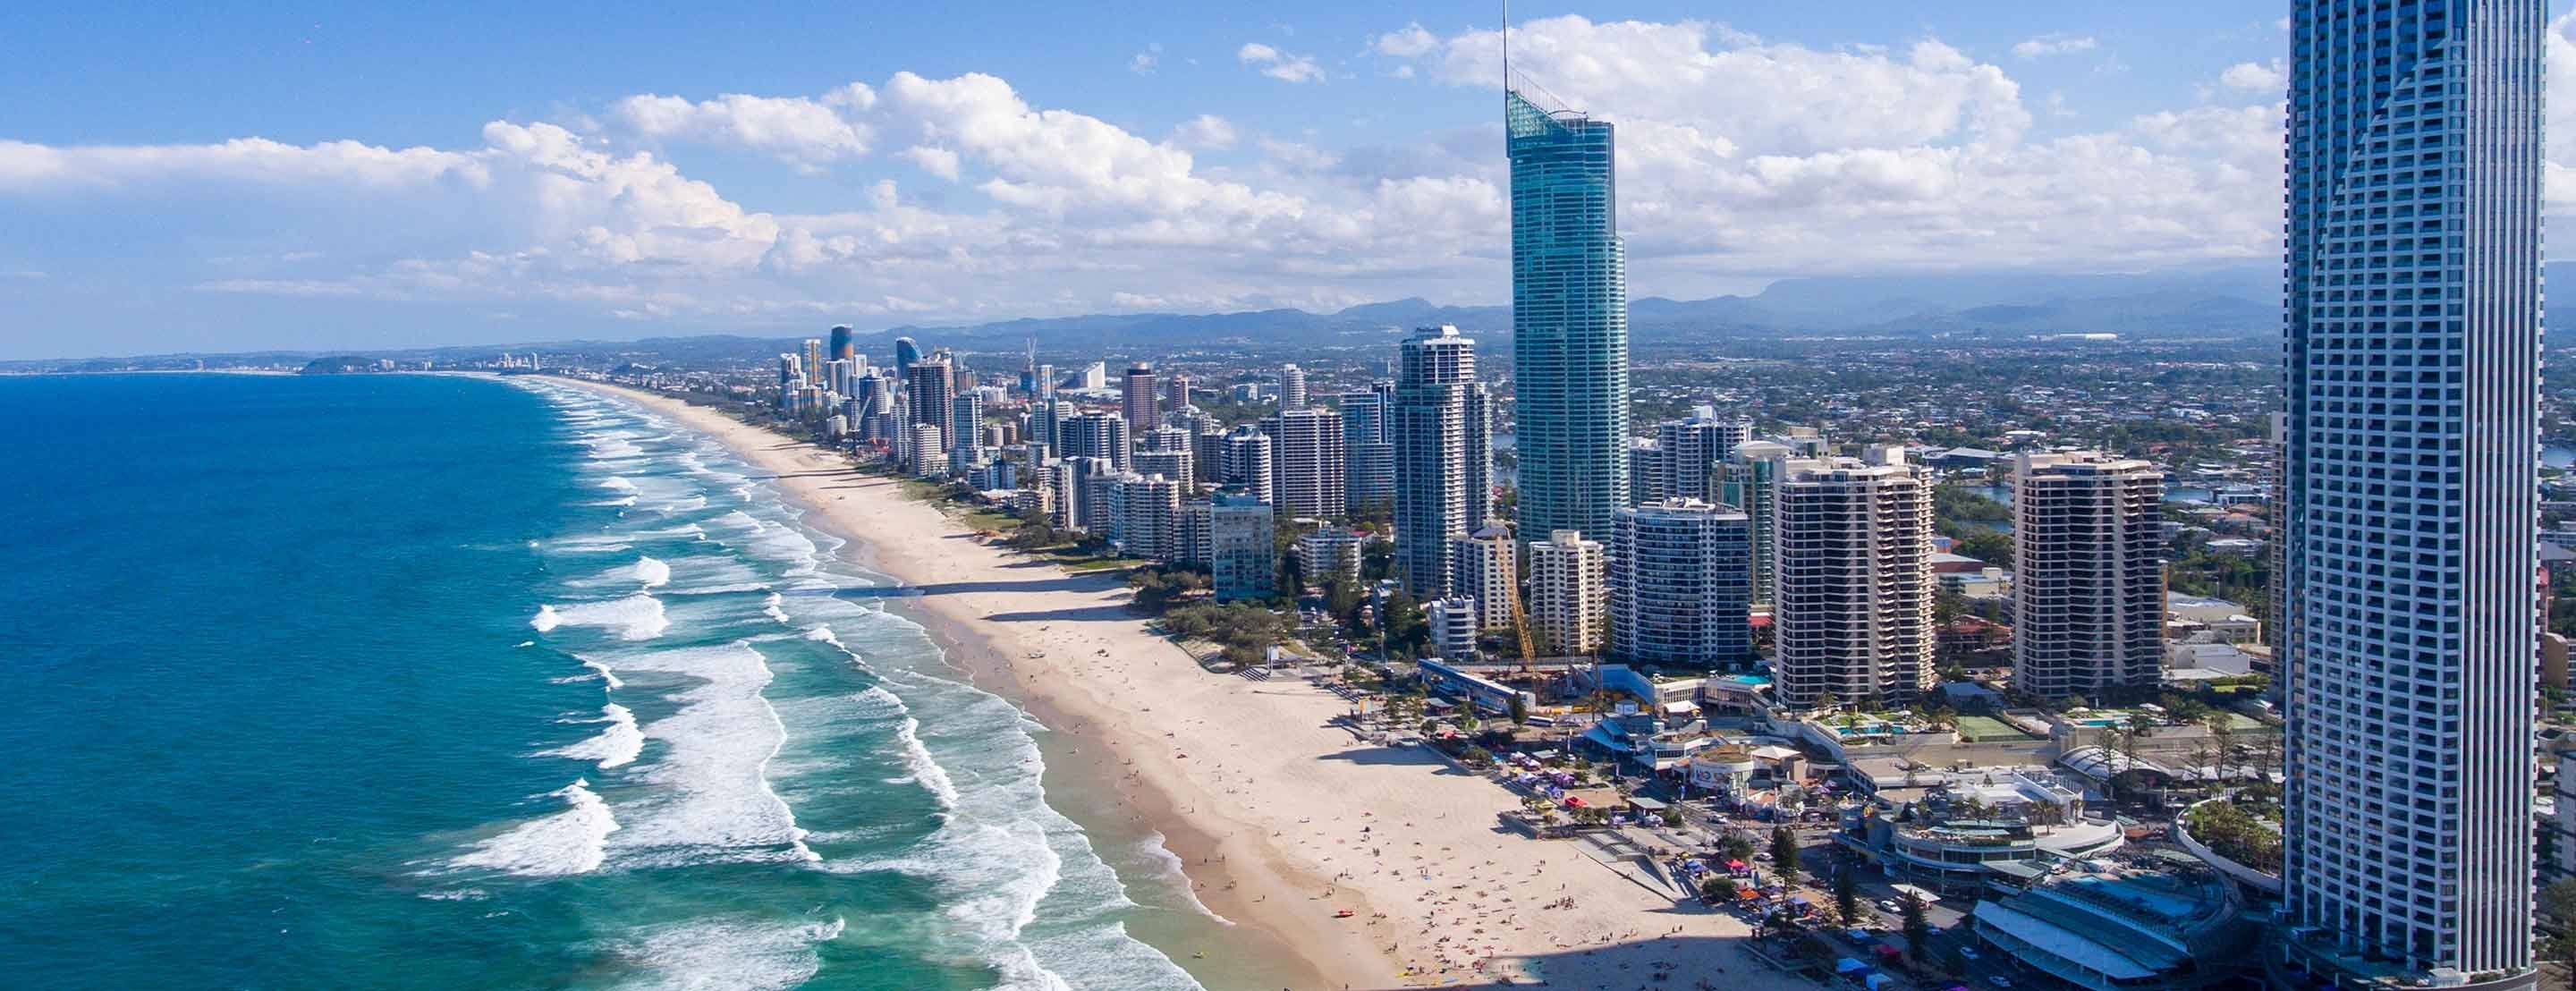 View of Surfers Paradise on the Gold Coast